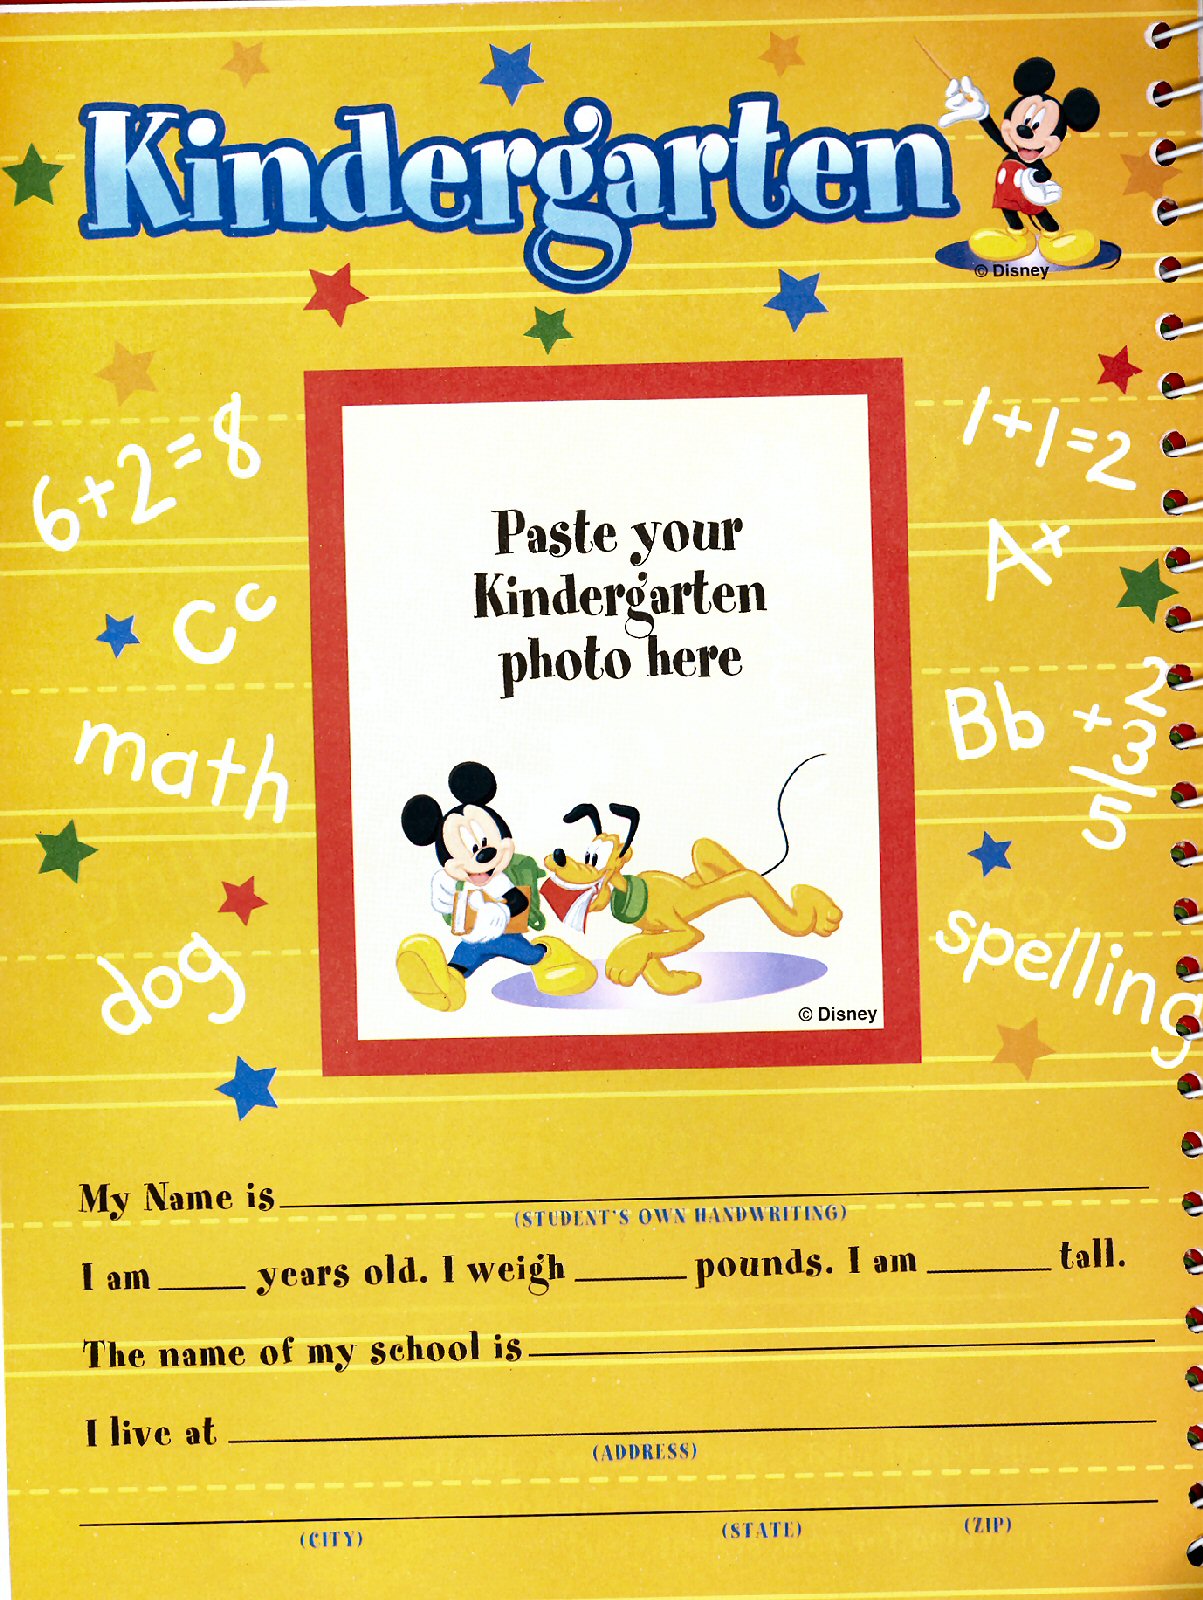 Mickey Mouse School Days Memories Book